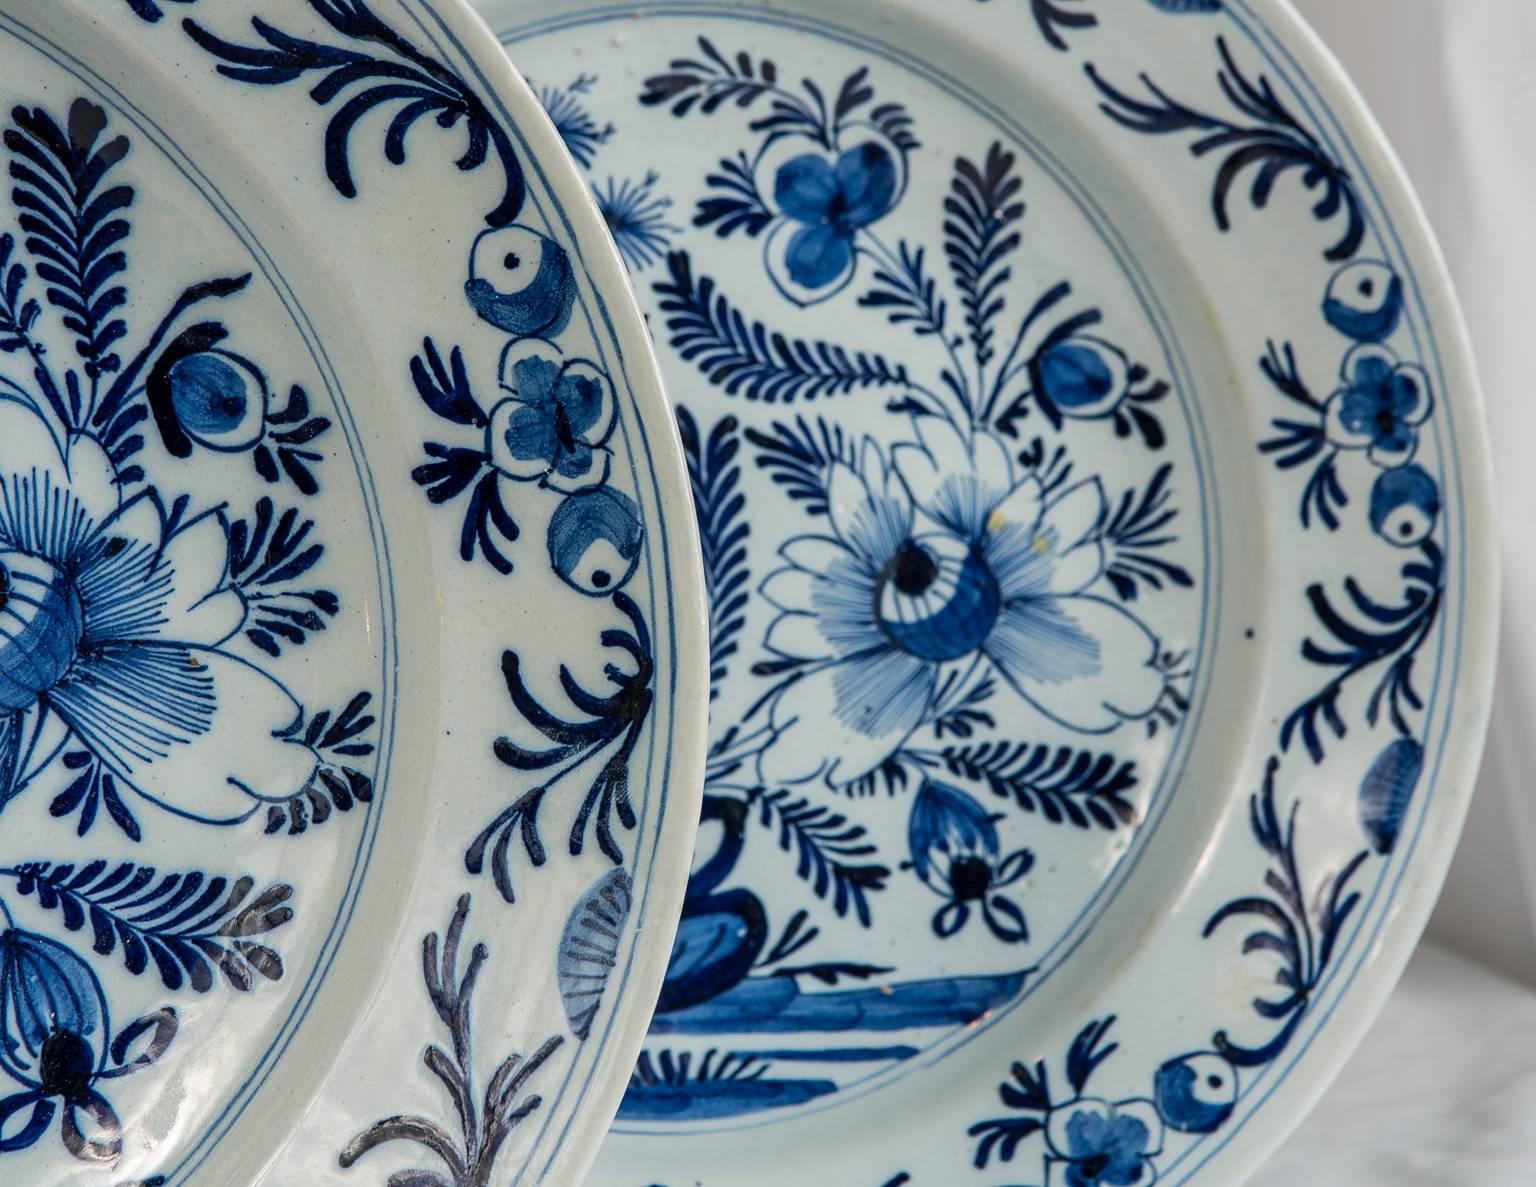 Pair of Blue and White Delft Chargers Made in Netherlands circa 1800 (Niederländisch)